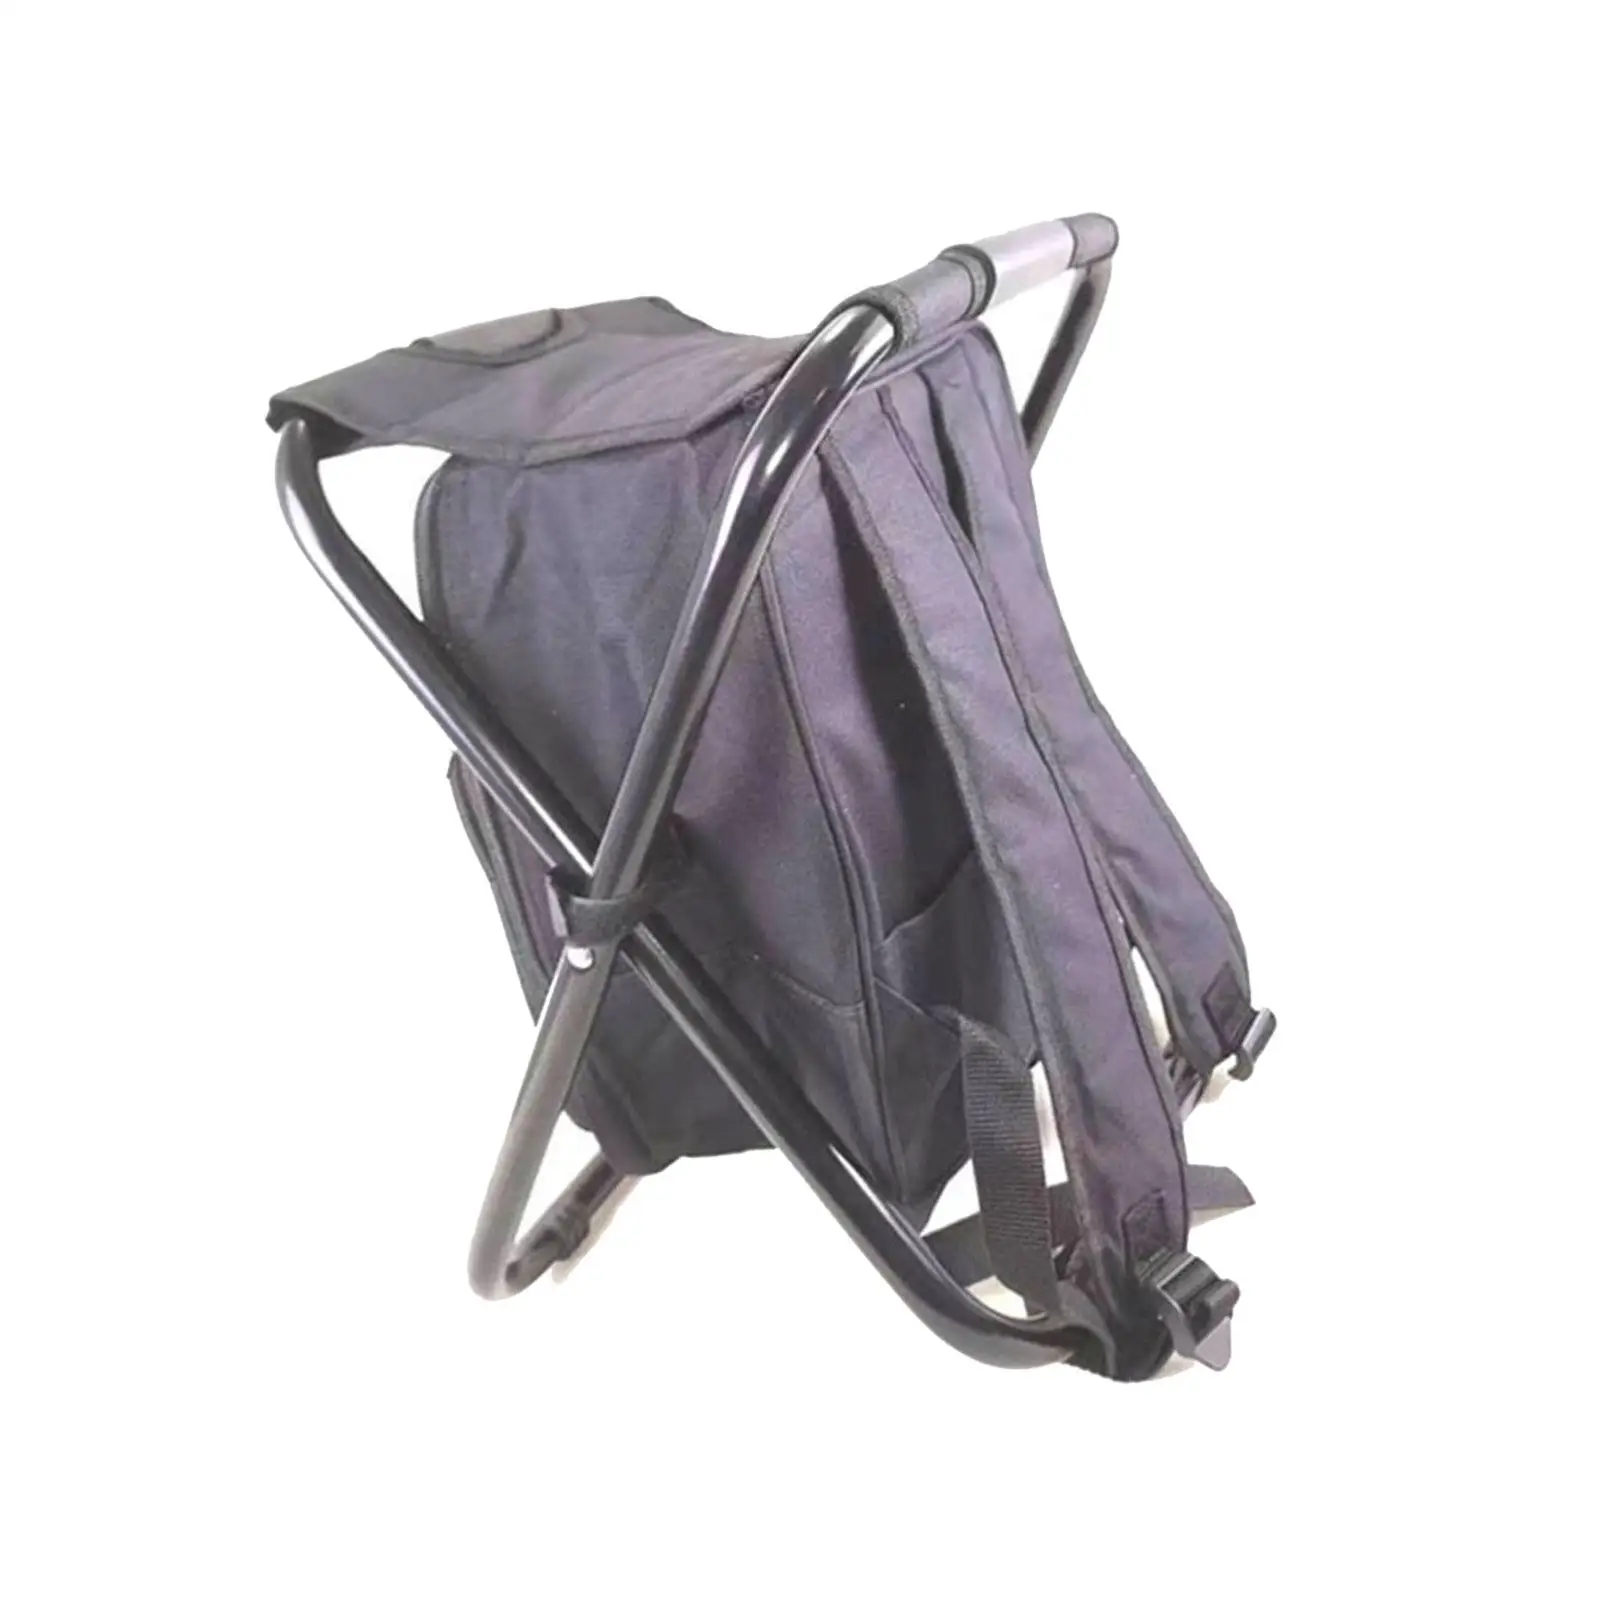 Backpack Chairs Lightweight Camping Chair Portable with Straps Convenient Carry